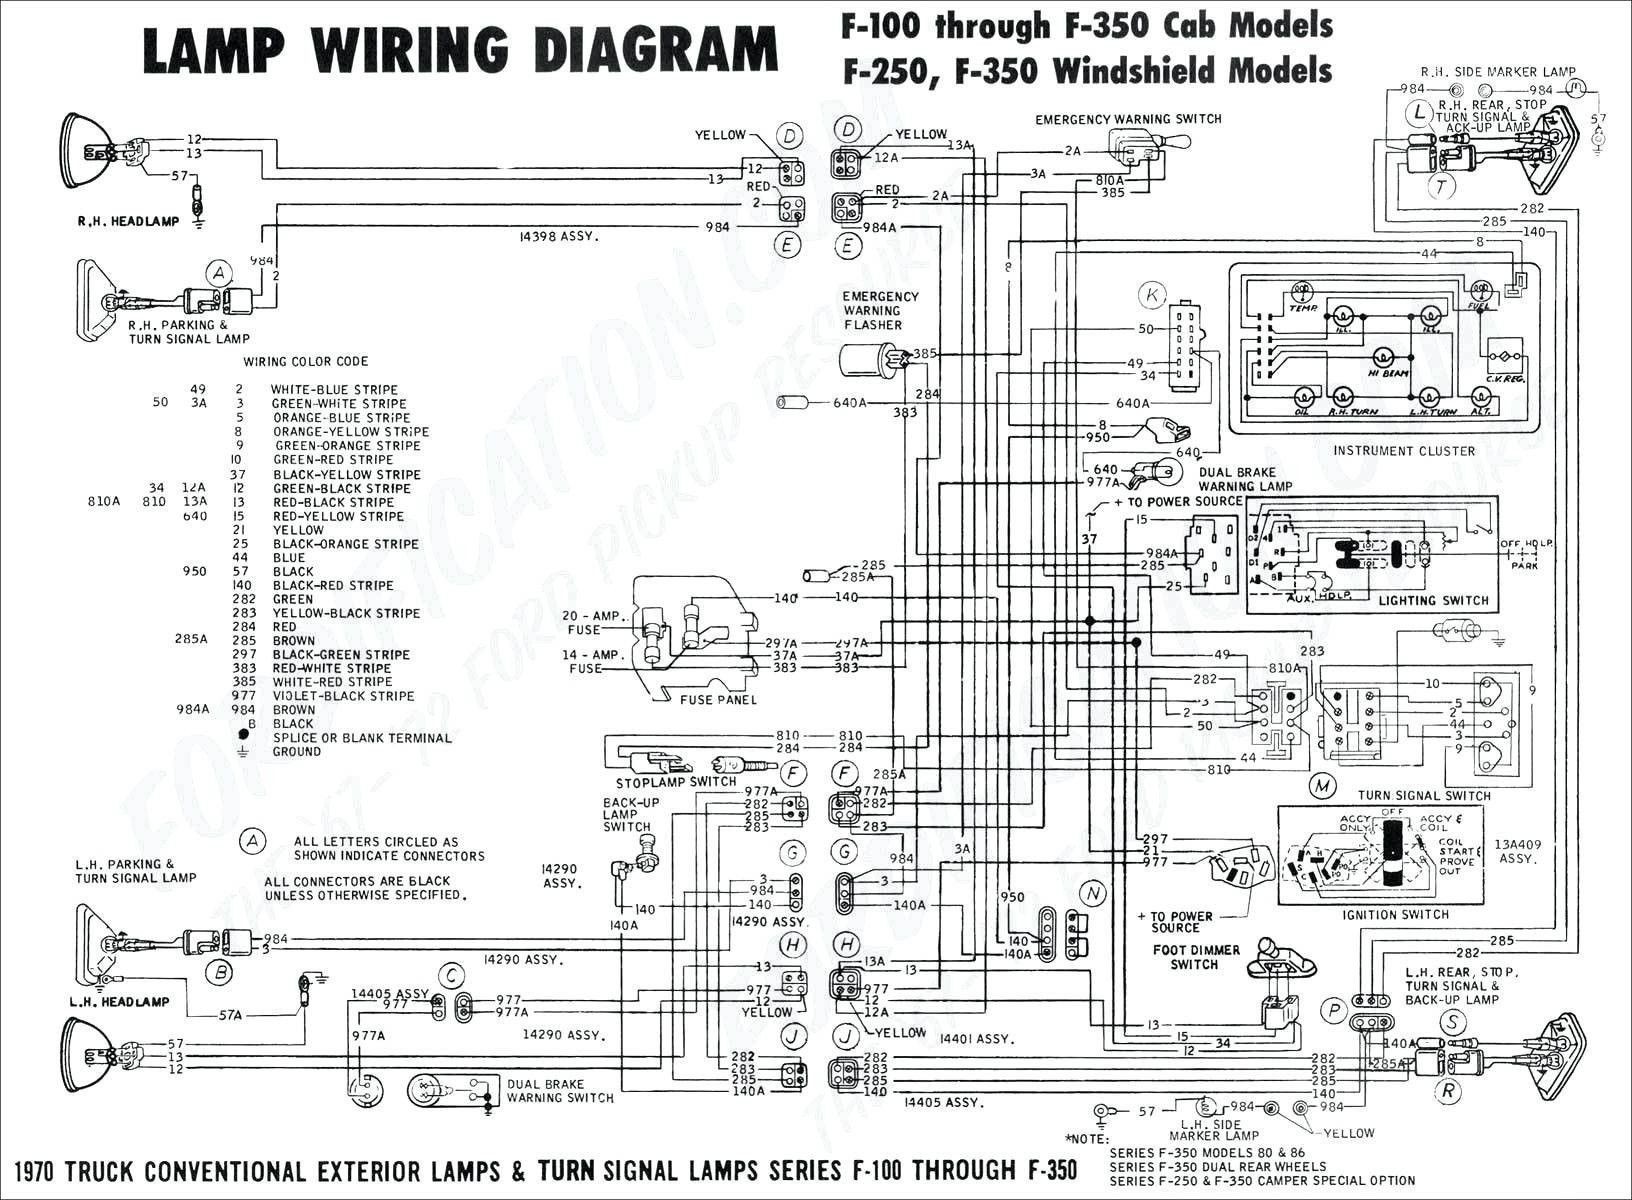 Car Amp Wiring Diagram Pin by Brid Webster On Diagram Chart Of Car Amp Wiring Diagram